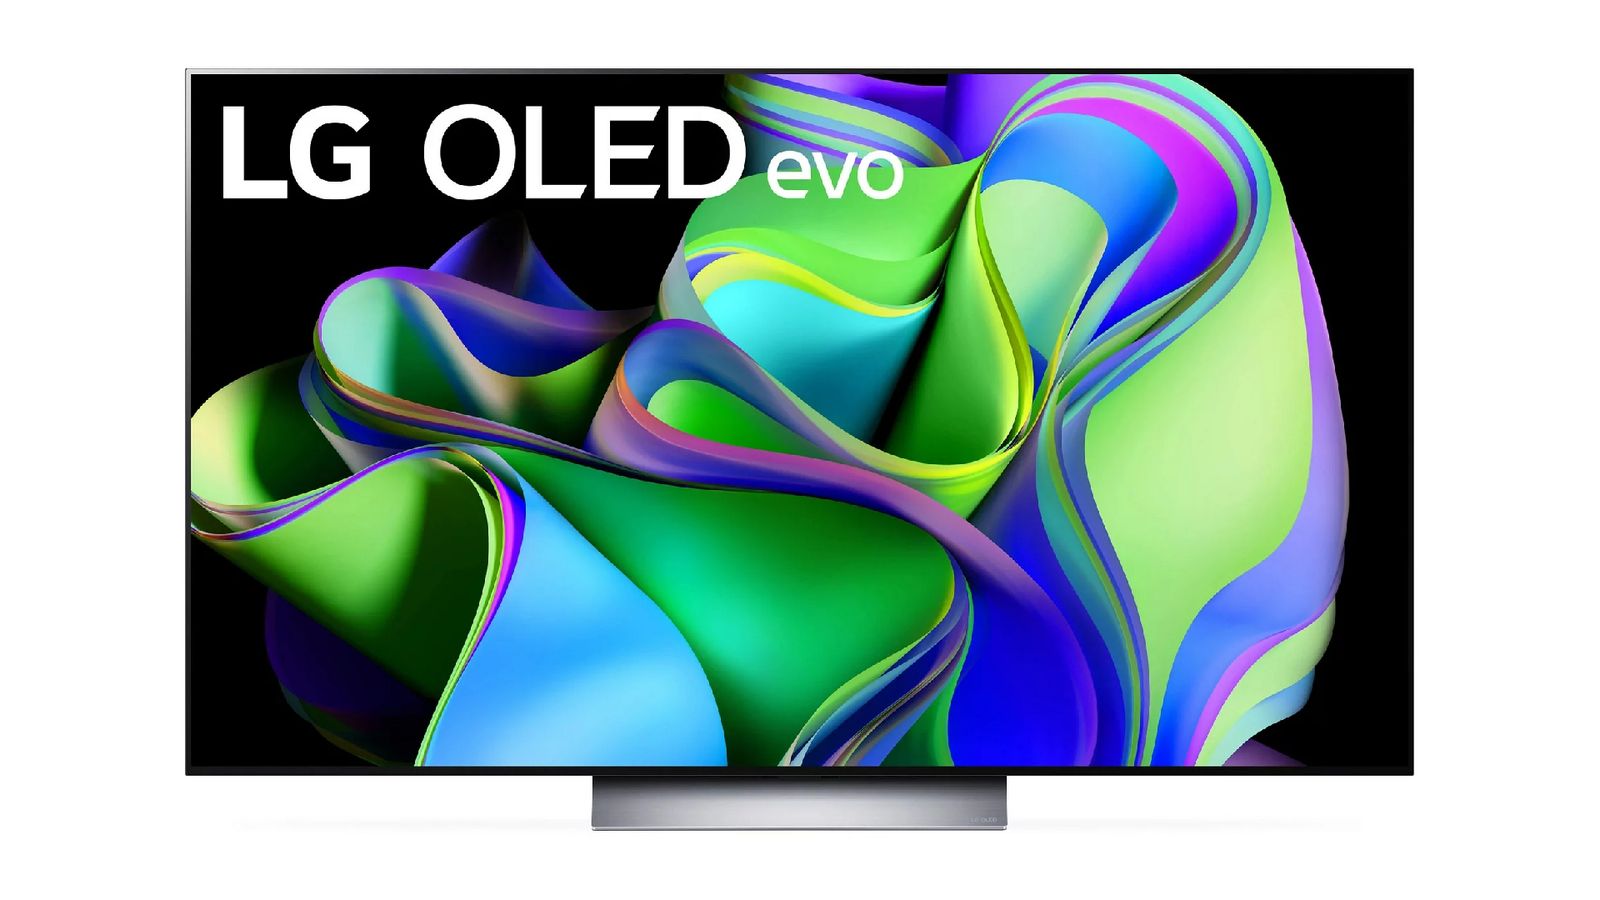 LG C3 product image of a near-frameless dark grey and black TV featuring a wavy green, blue, and purple pattern on the display.